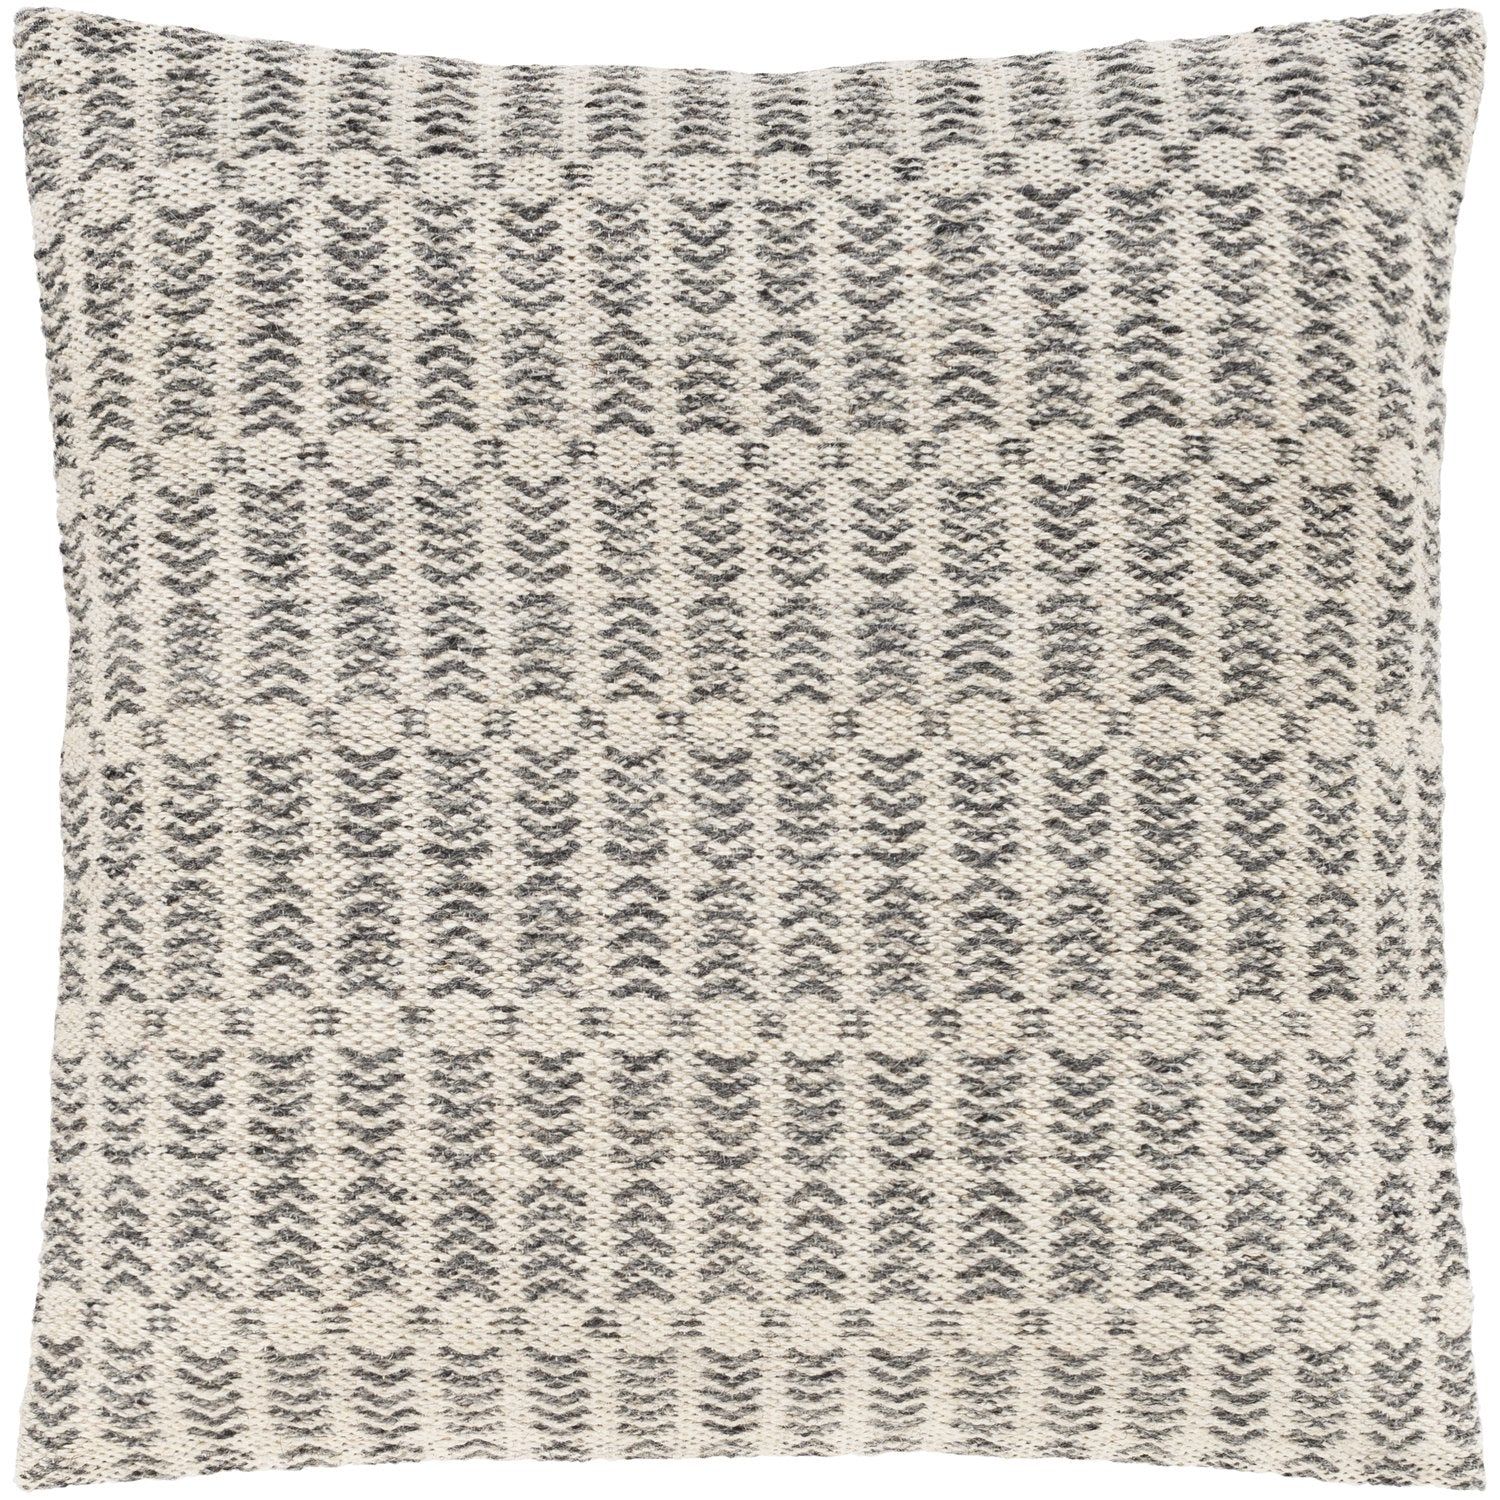 Leif Woven Pillow in Charcoal & Ivory | Burke Decor